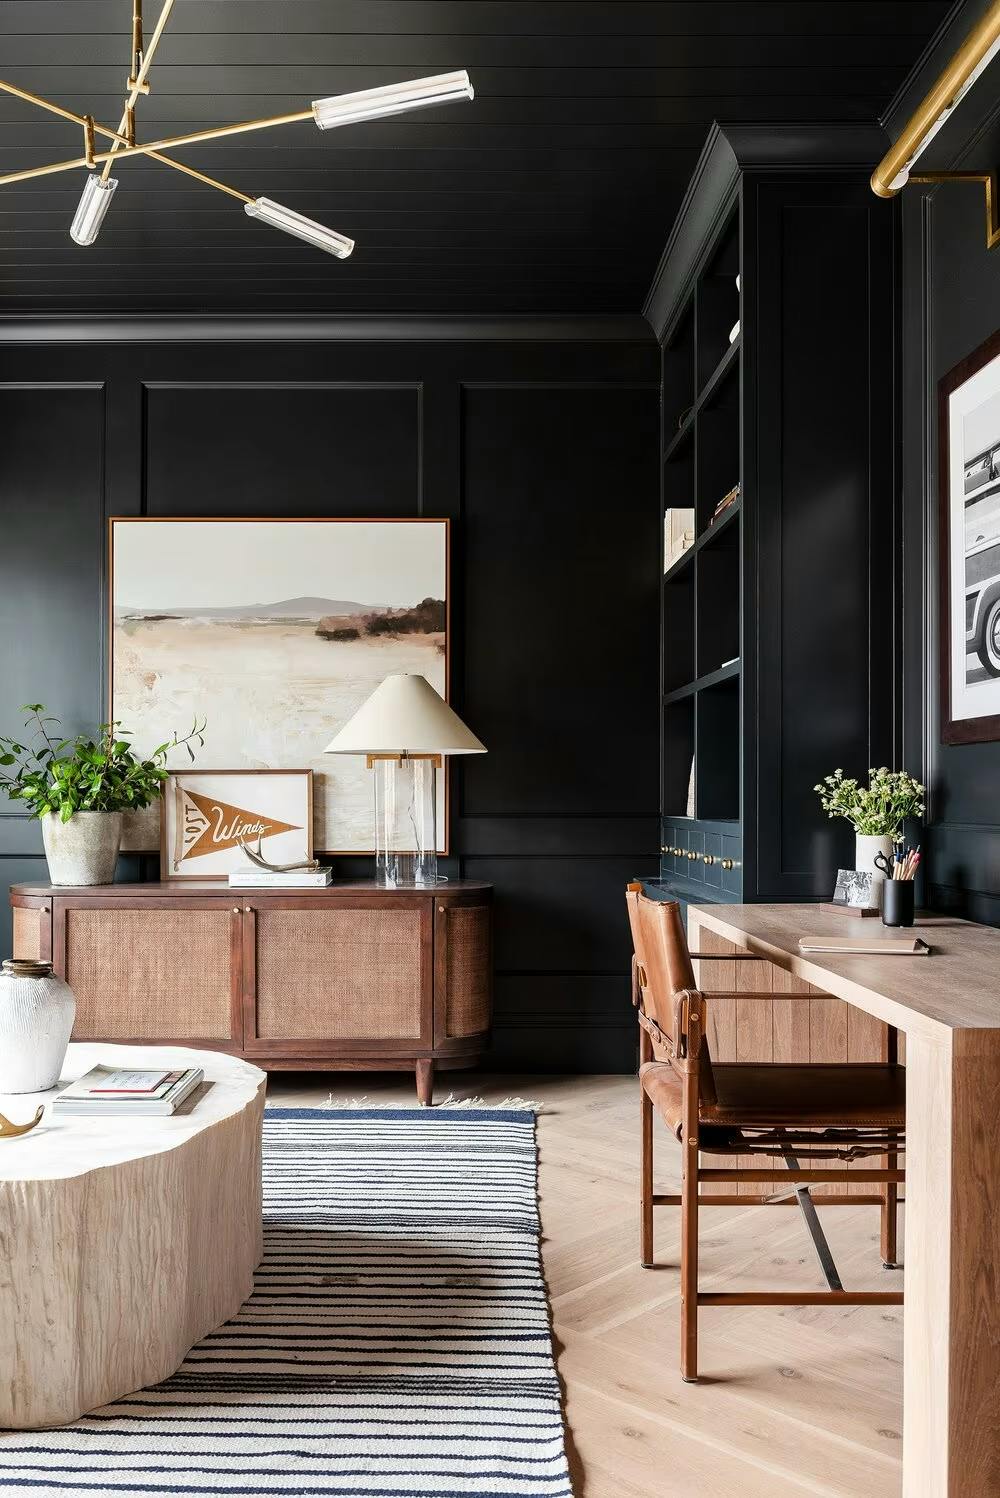 Green Black by Sherwin-Williams, featured in and photo by Studio Mcgee